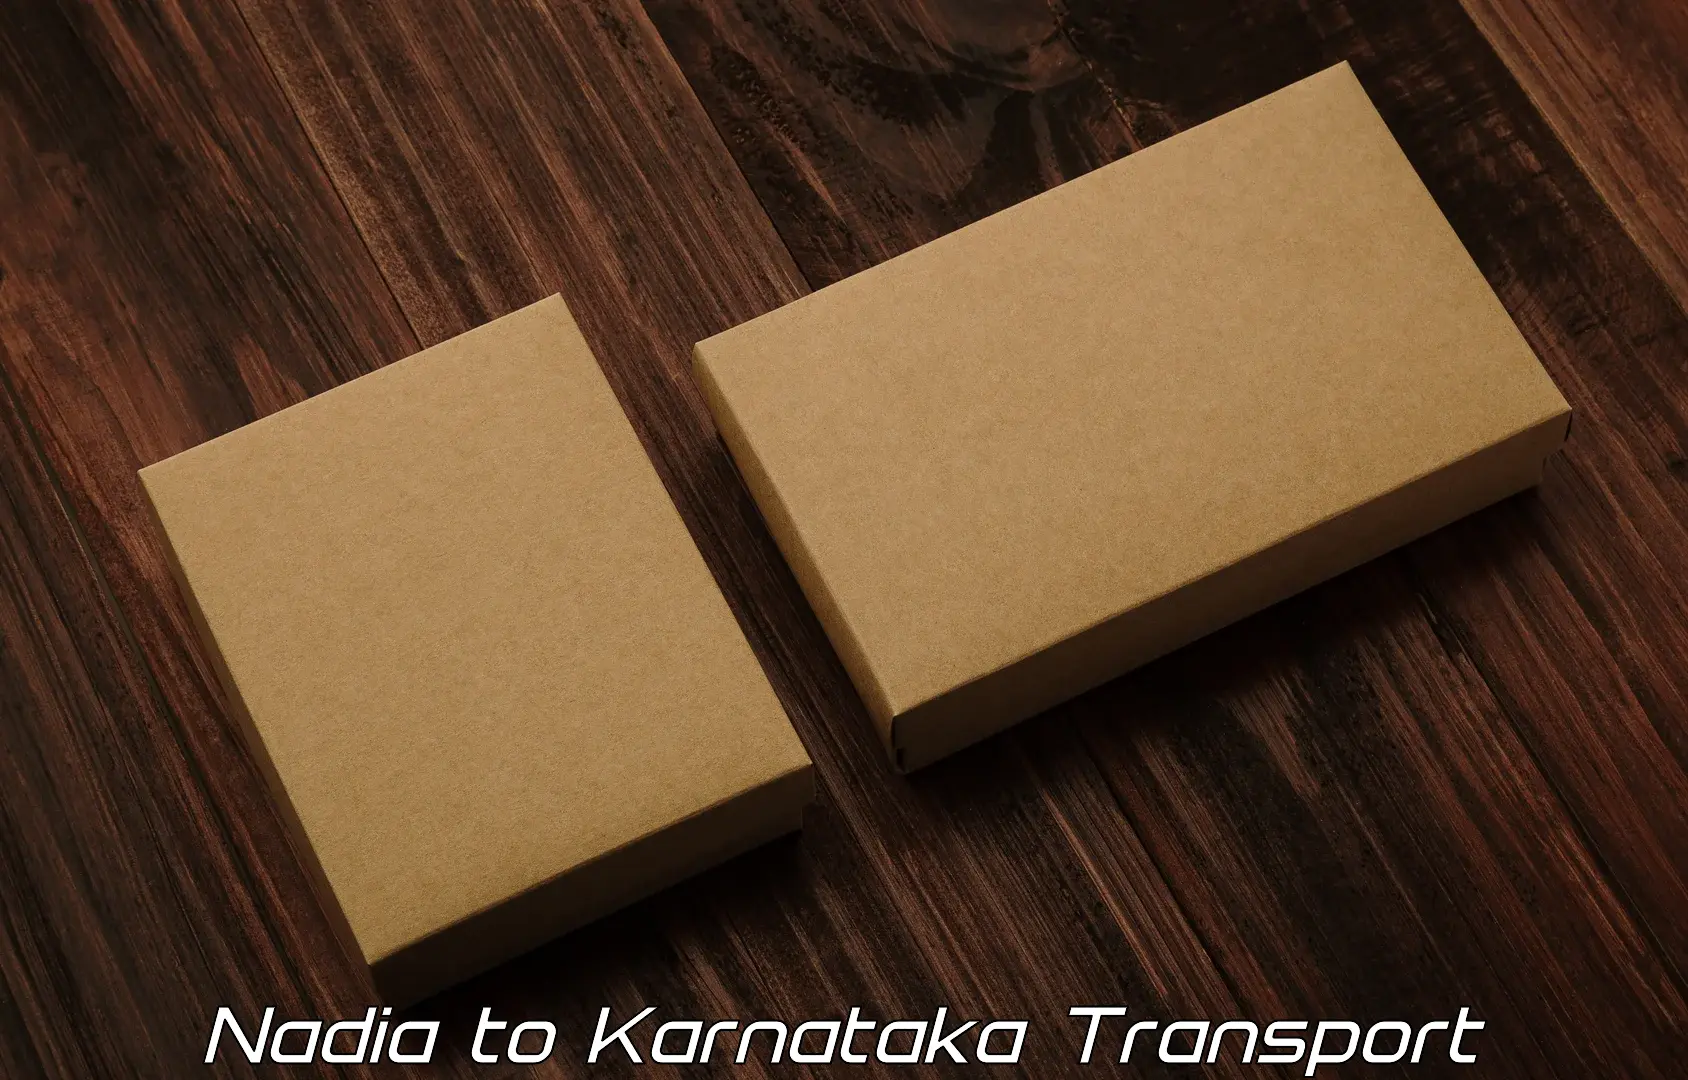 Express transport services Nadia to Mangalore